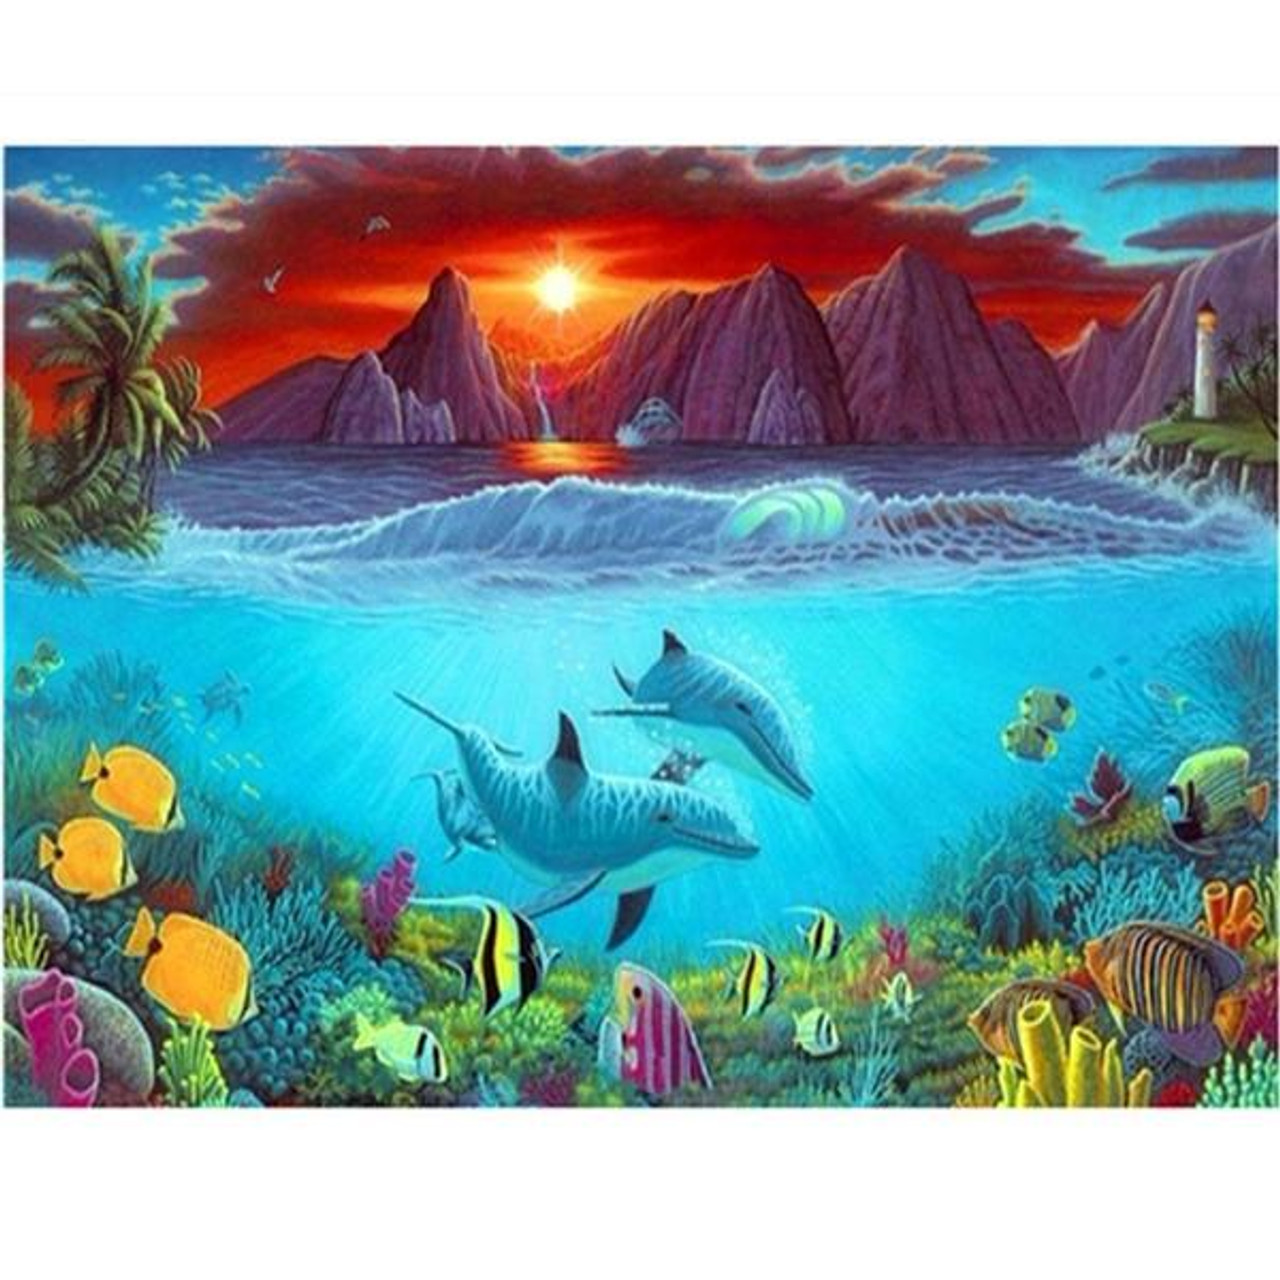 https://cdn11.bigcommerce.com/s-xf1j2e32mt/images/stencil/1280x1280/products/3286/3069/5d-diamond-painting-dolphin-sunset-mountains-kit-28768638795959__96565.1630509875.jpg?c=1